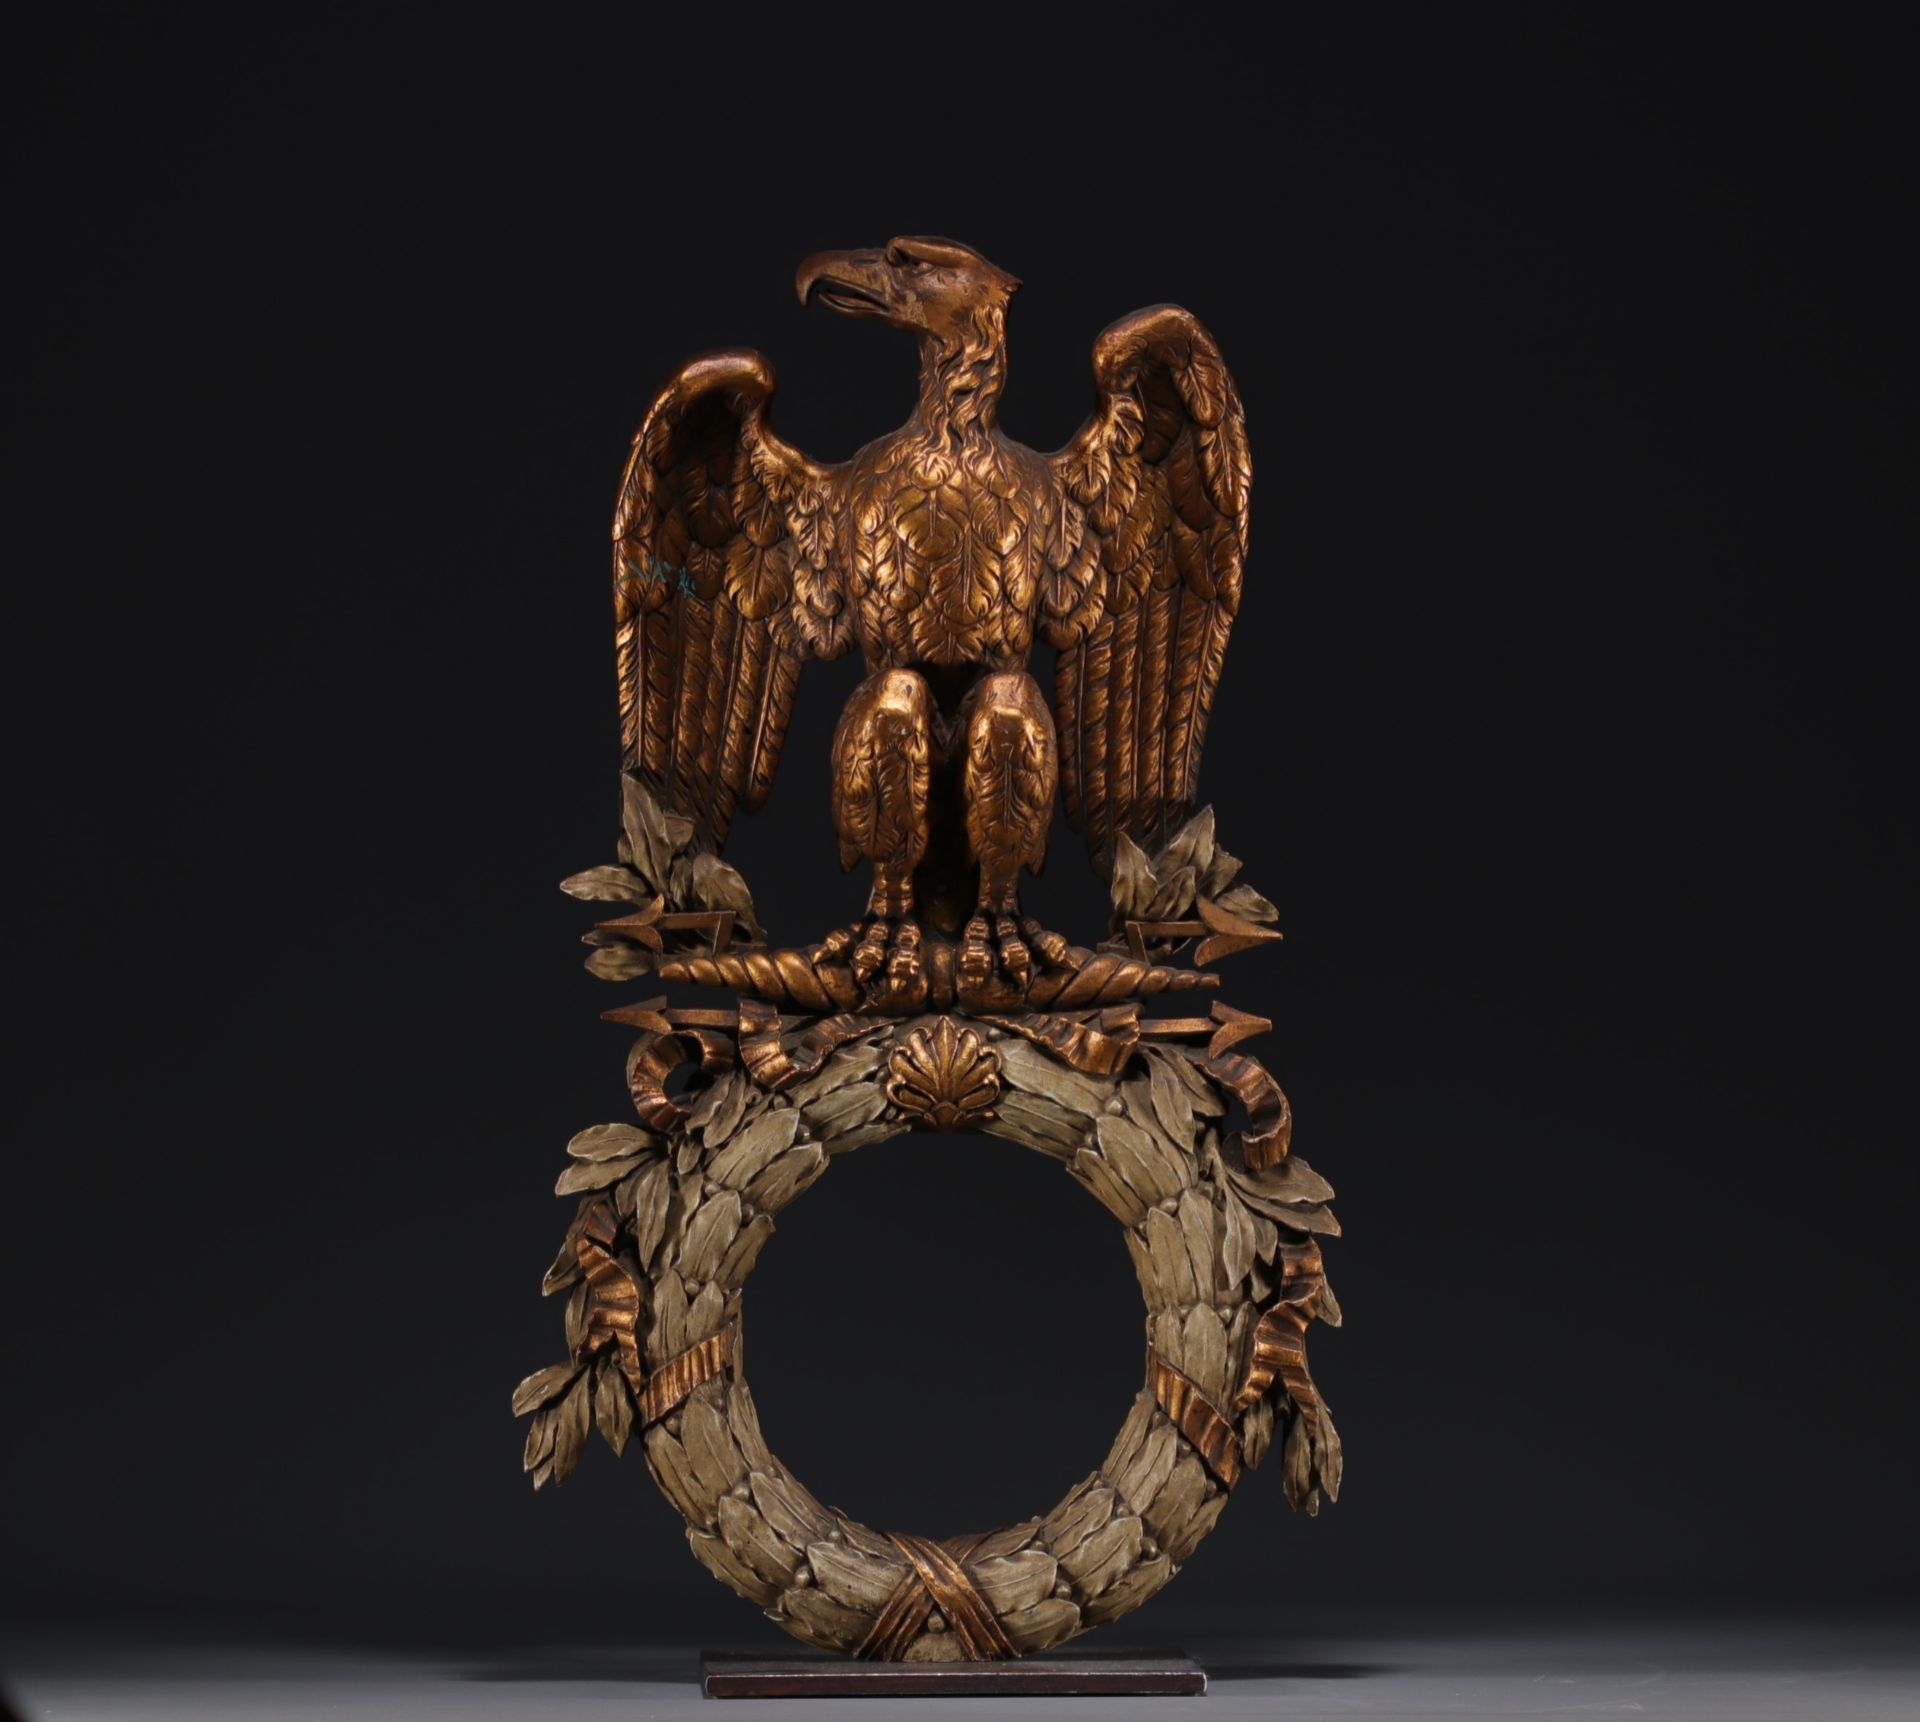 An Empire period carved and gilded Imperial eagle with outstretched wings.